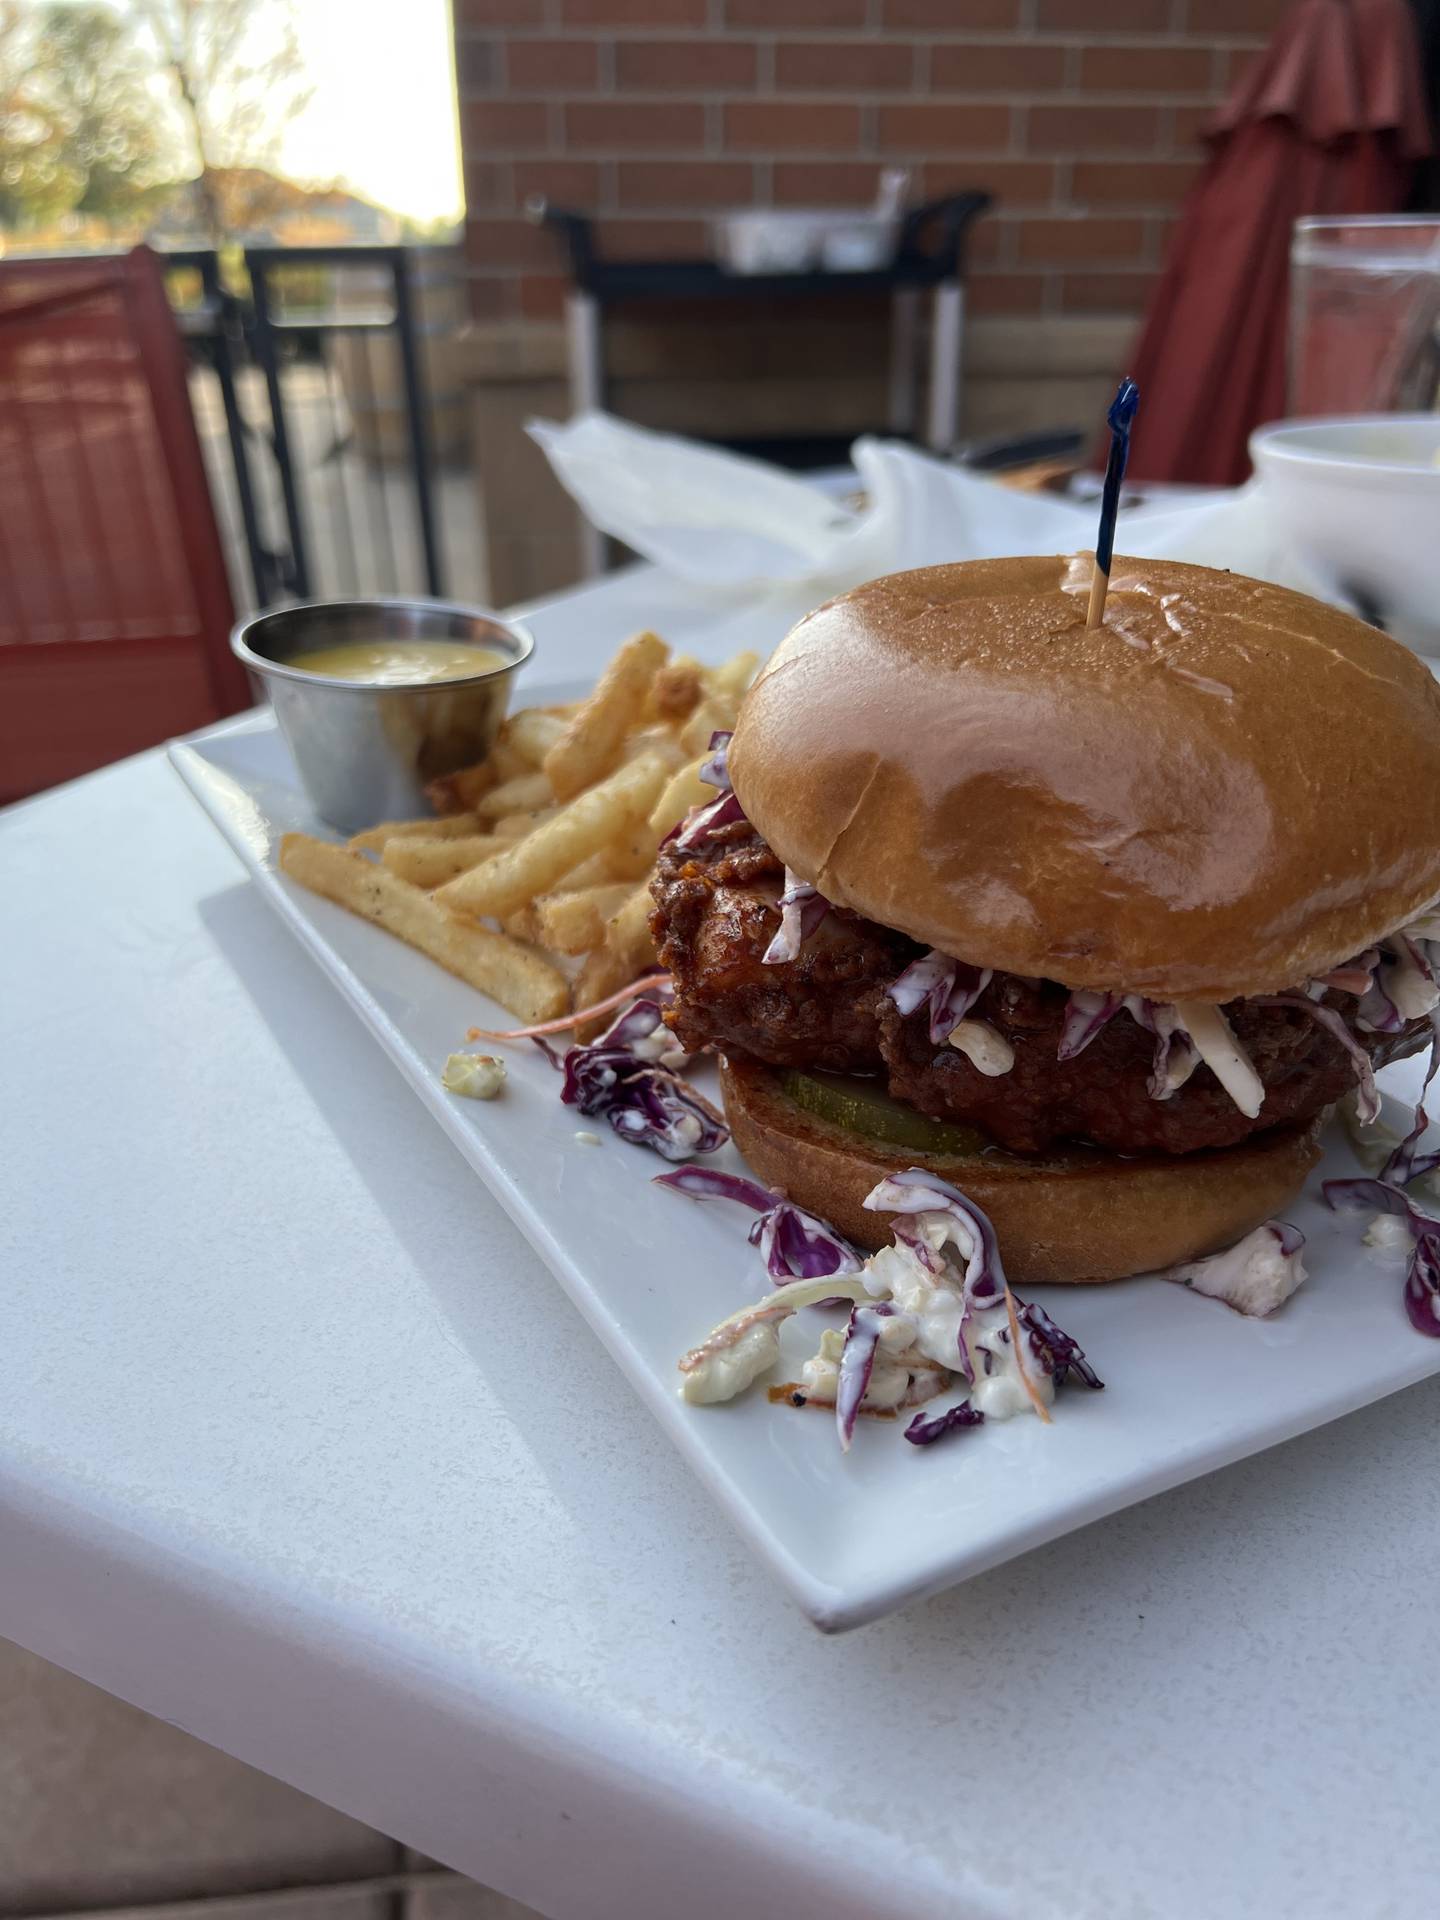 The Nashville hot chicken sandwich at Village Vintner Winery and Brewery is topped with pickles and a unique blue cheese coleslaw.